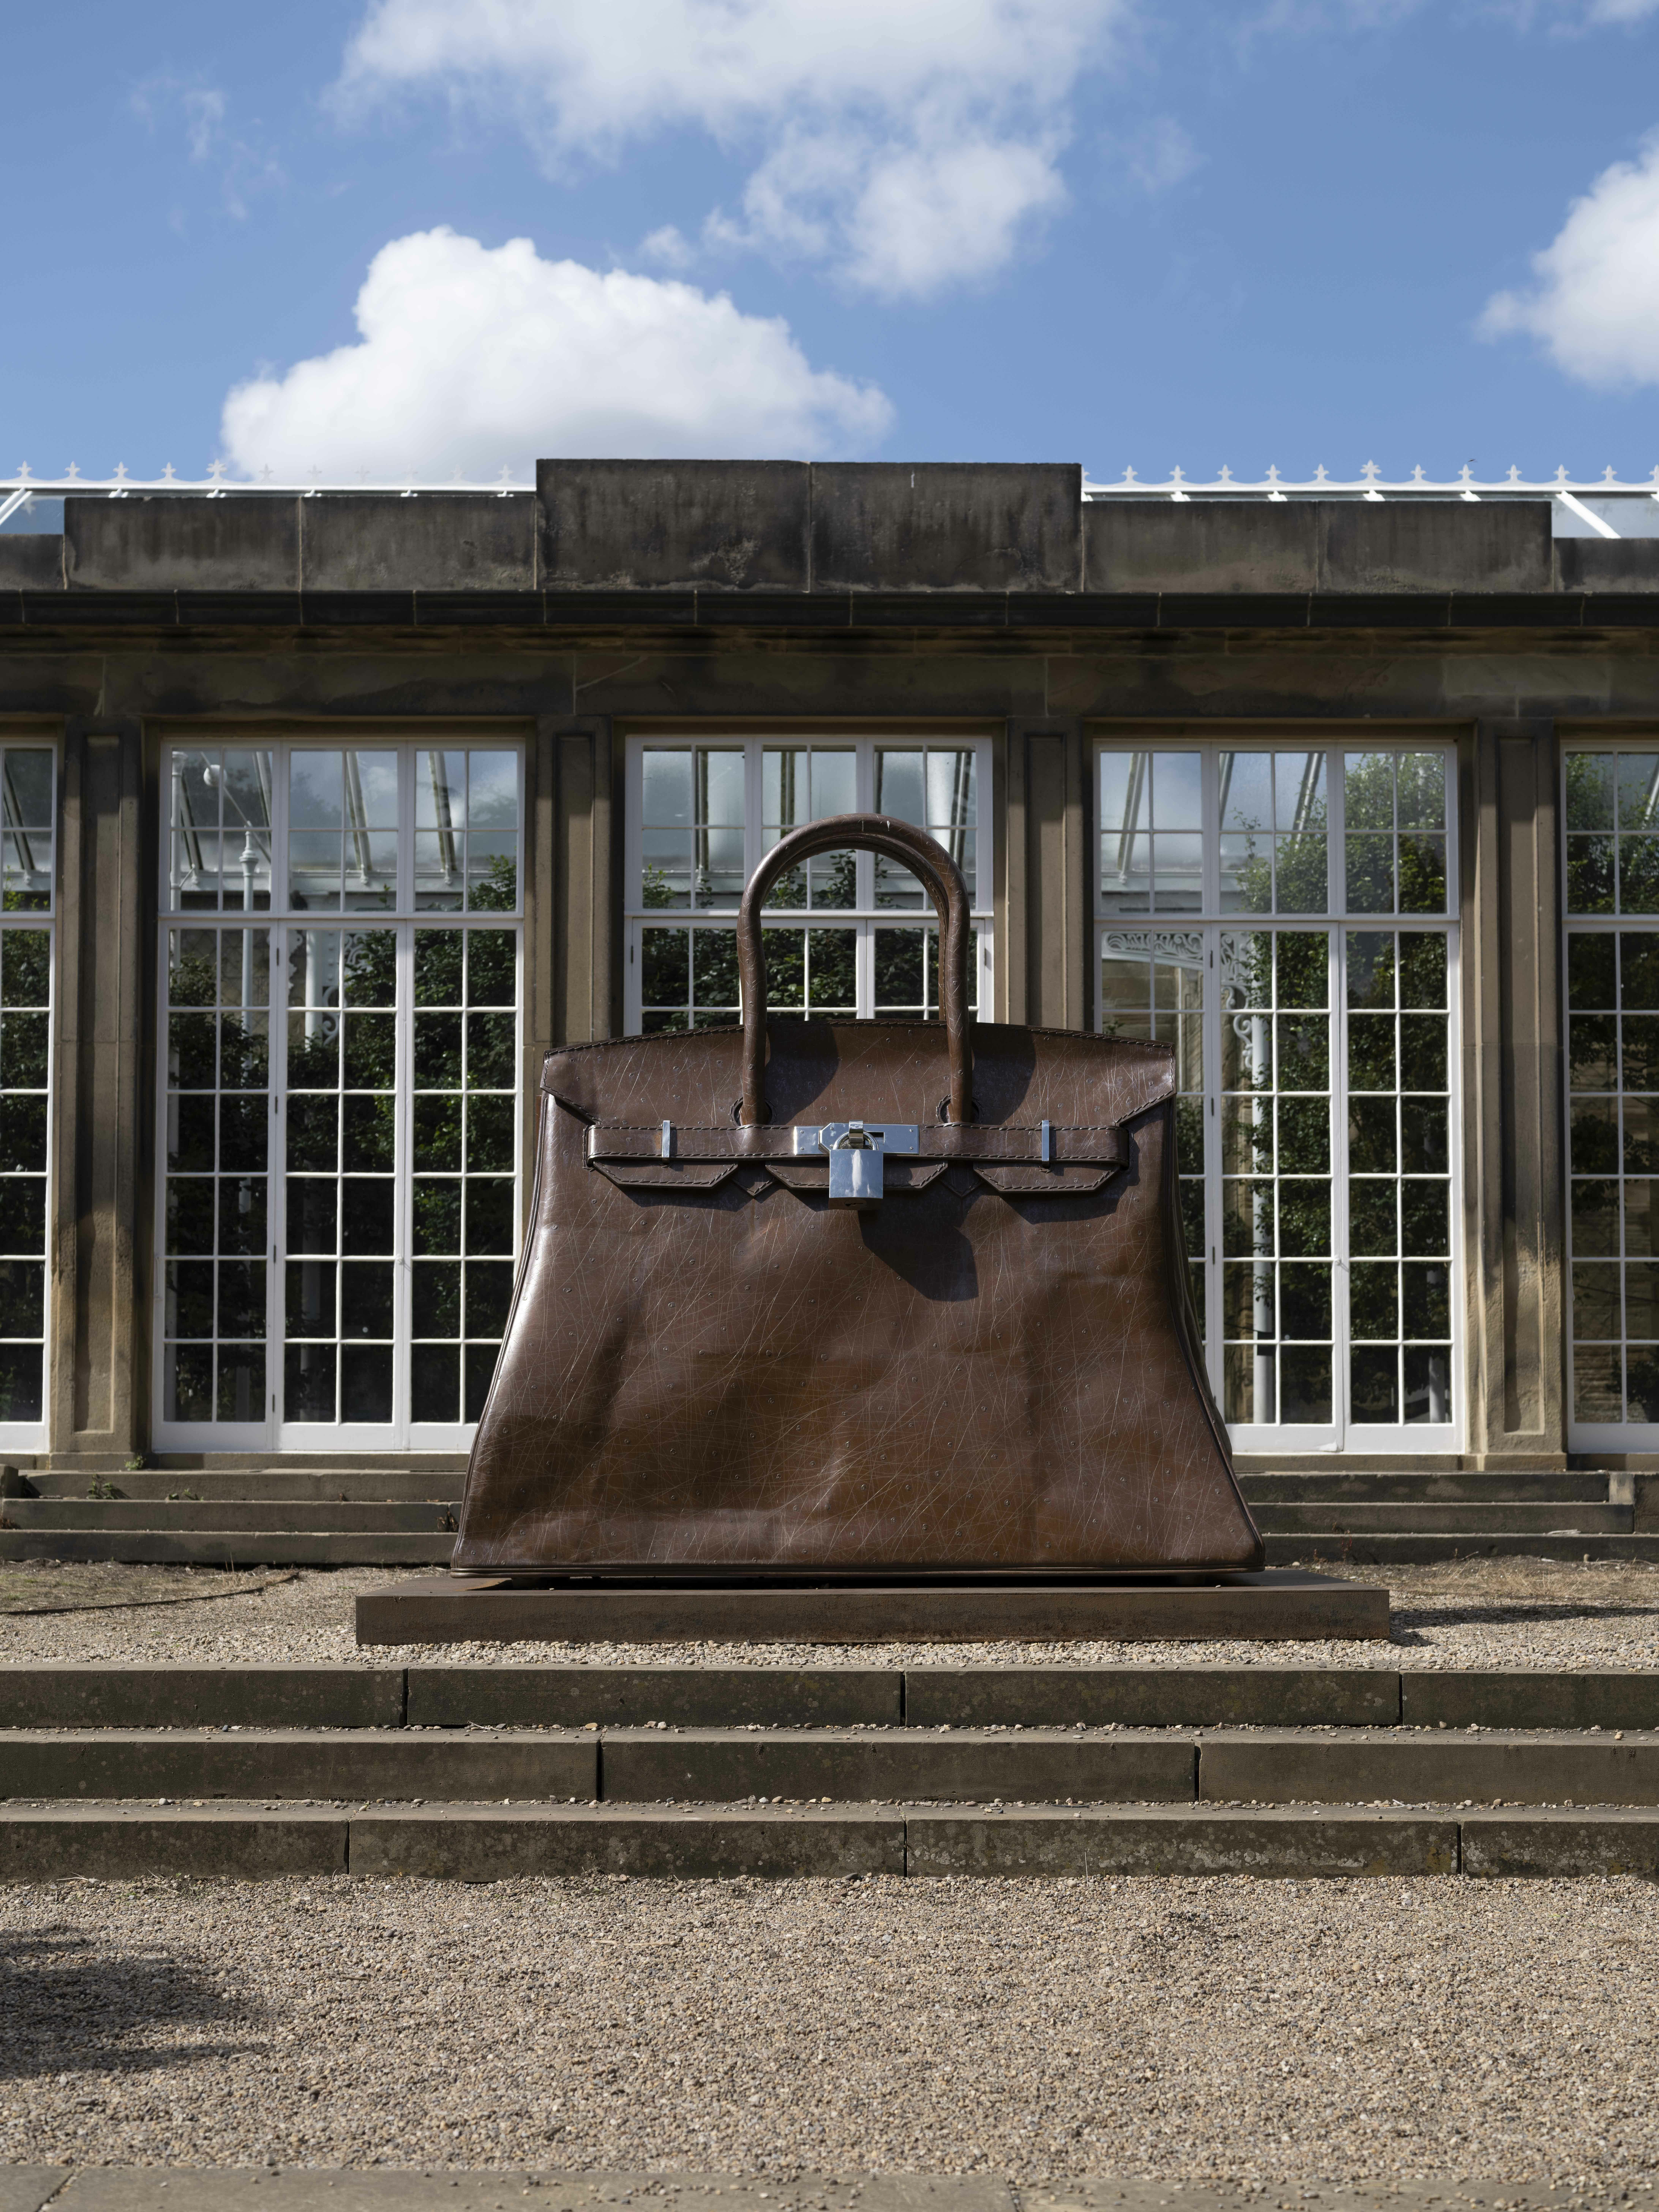 A giant brown Birkin handbag in front of a building with glass windows.